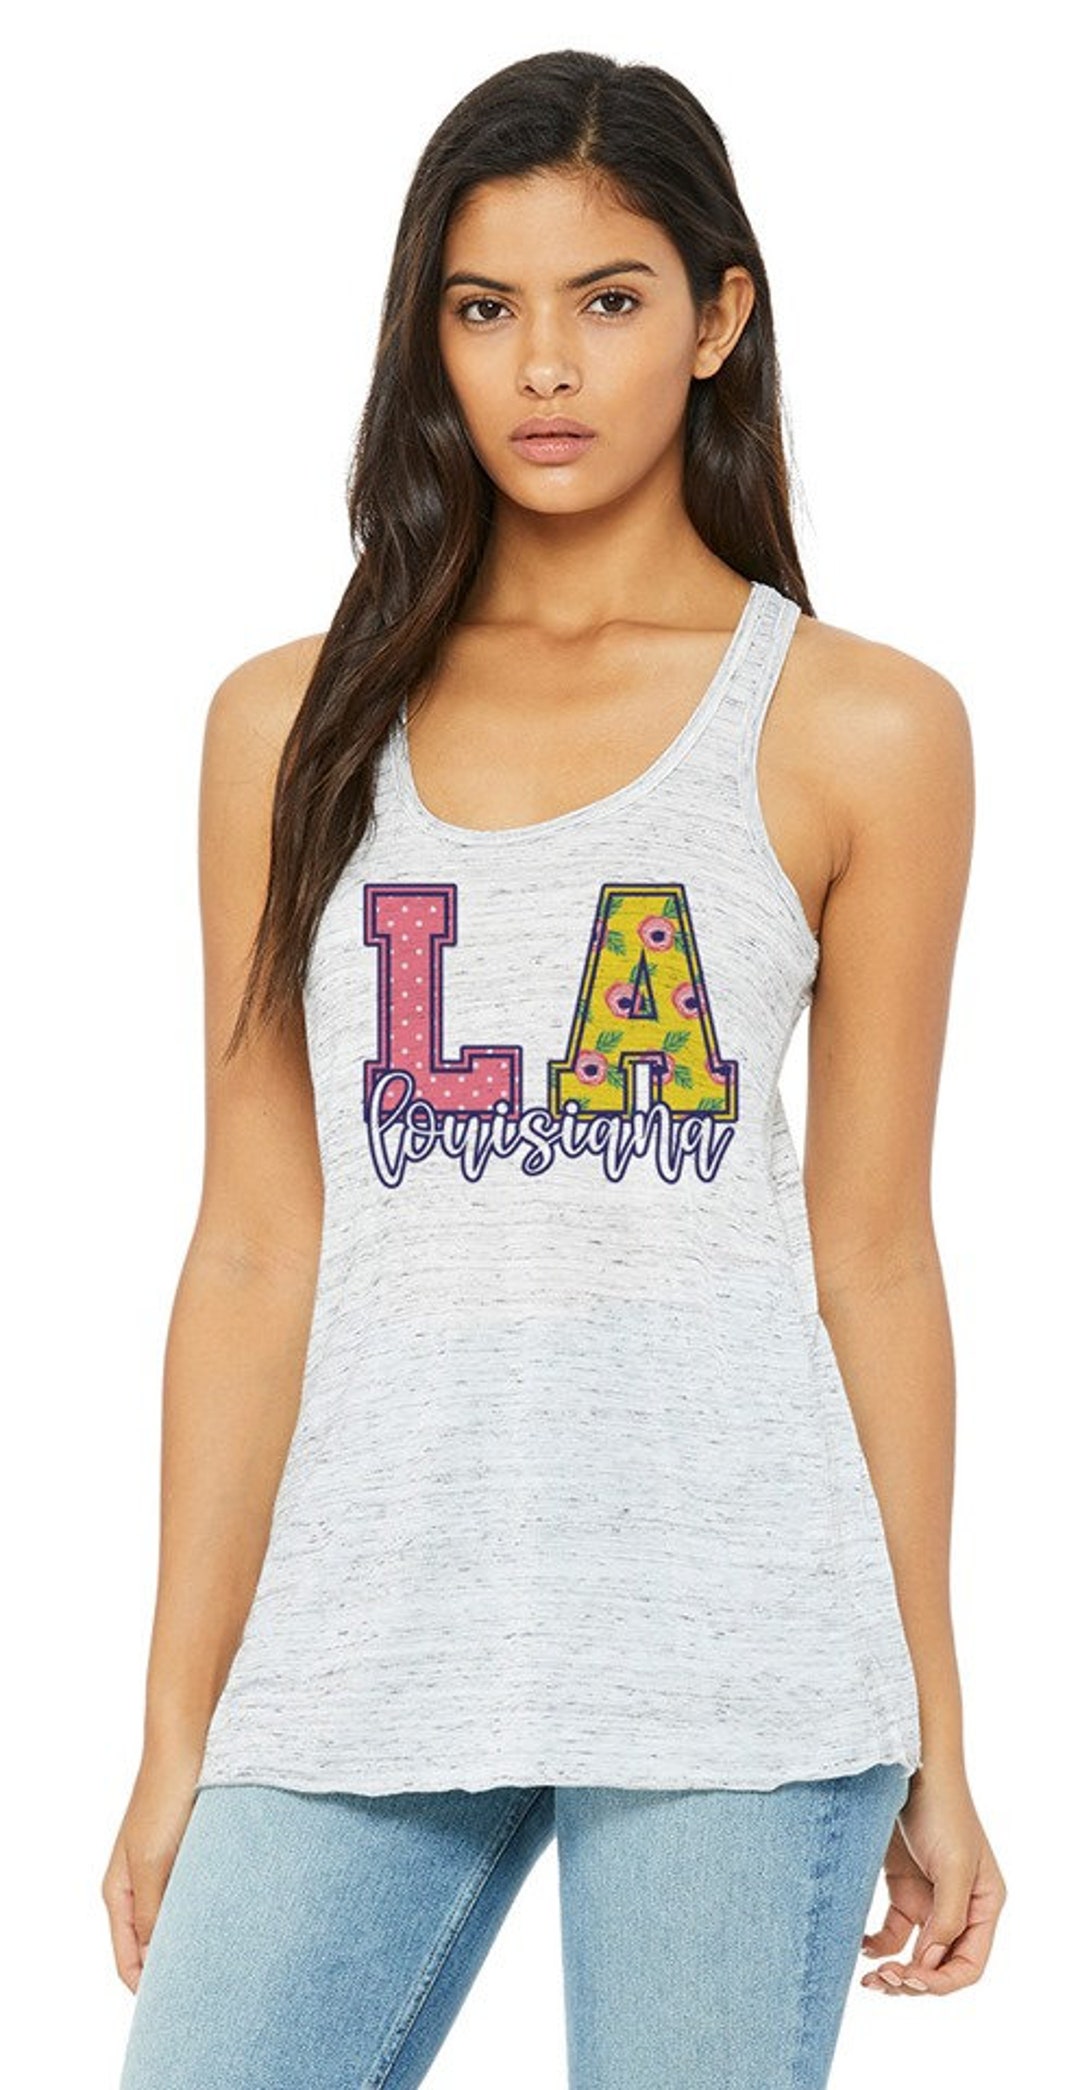 Louisiana Tank Top With Pink and Yellow Lettering Sublimation 